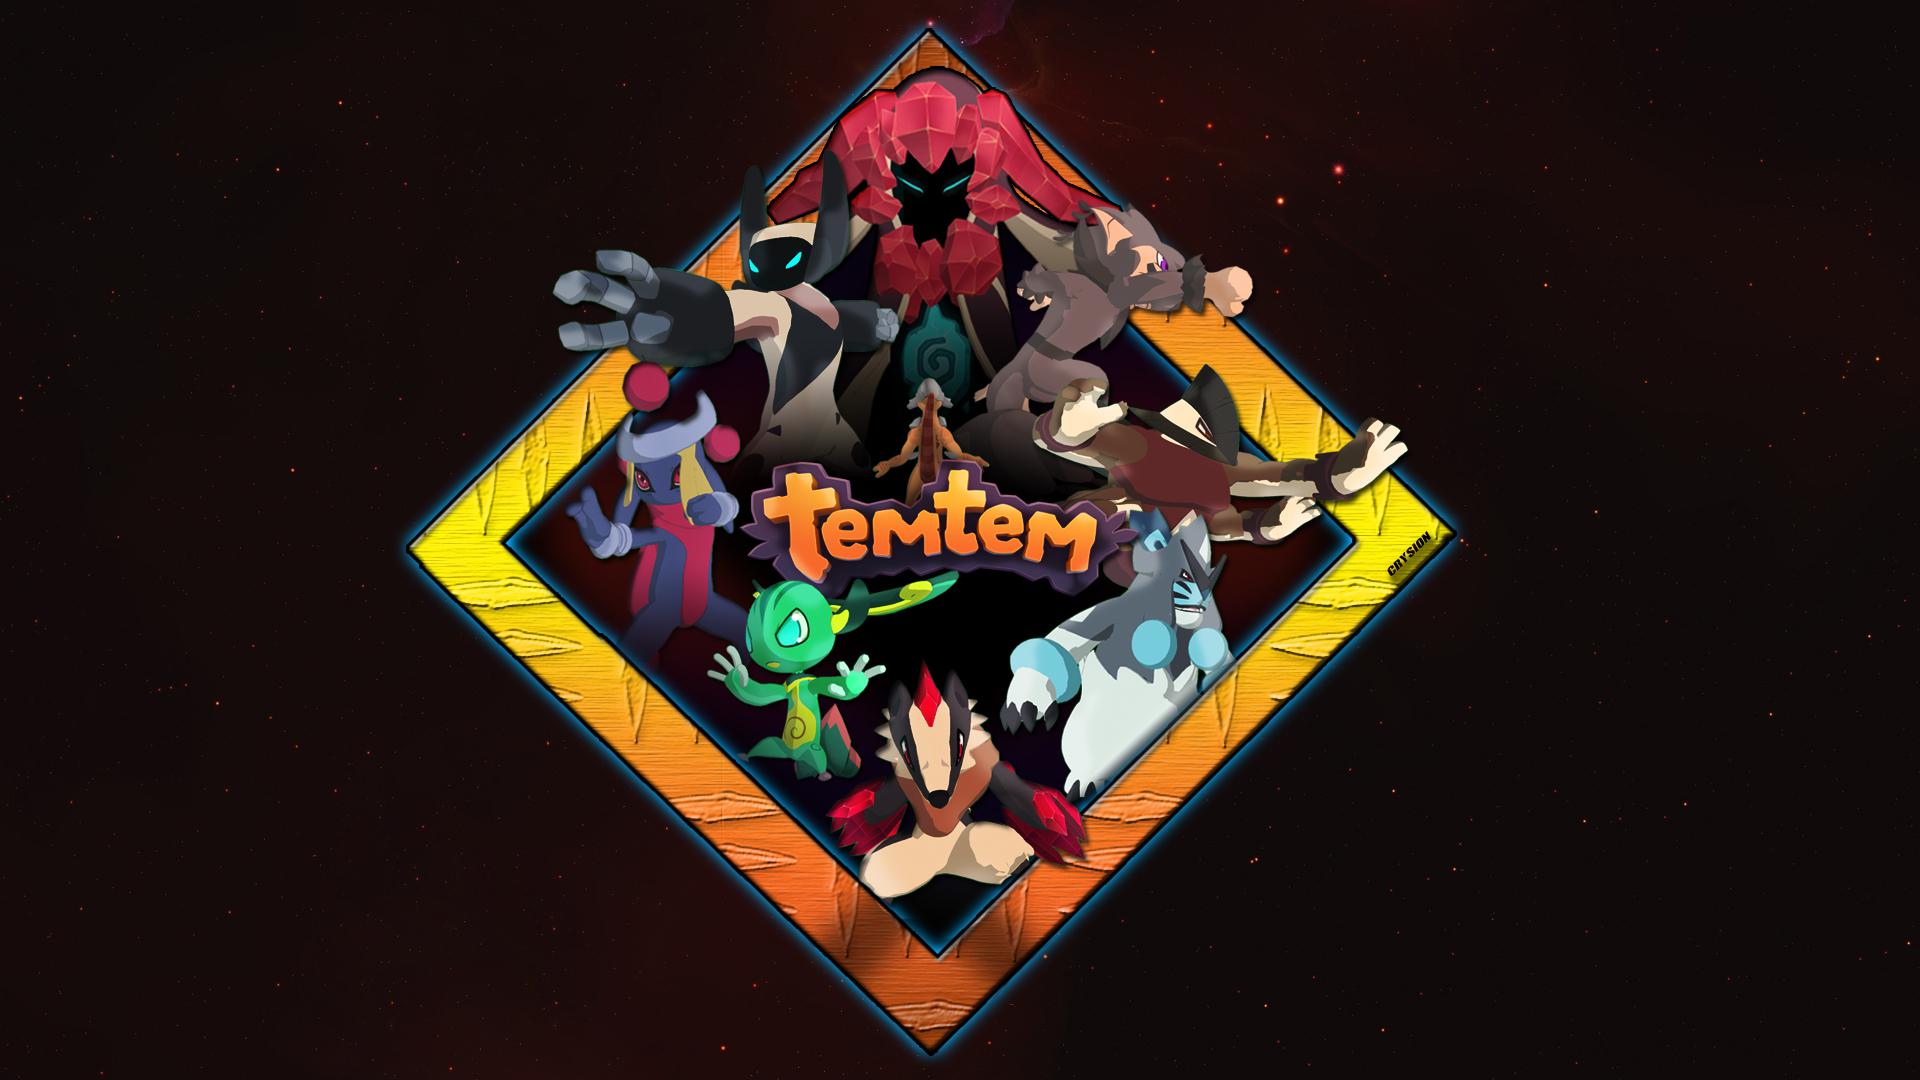 Tried To Make A Movie Like Temtem Poster Using The Ingame Models, I Hope Its Not That Bad ^^